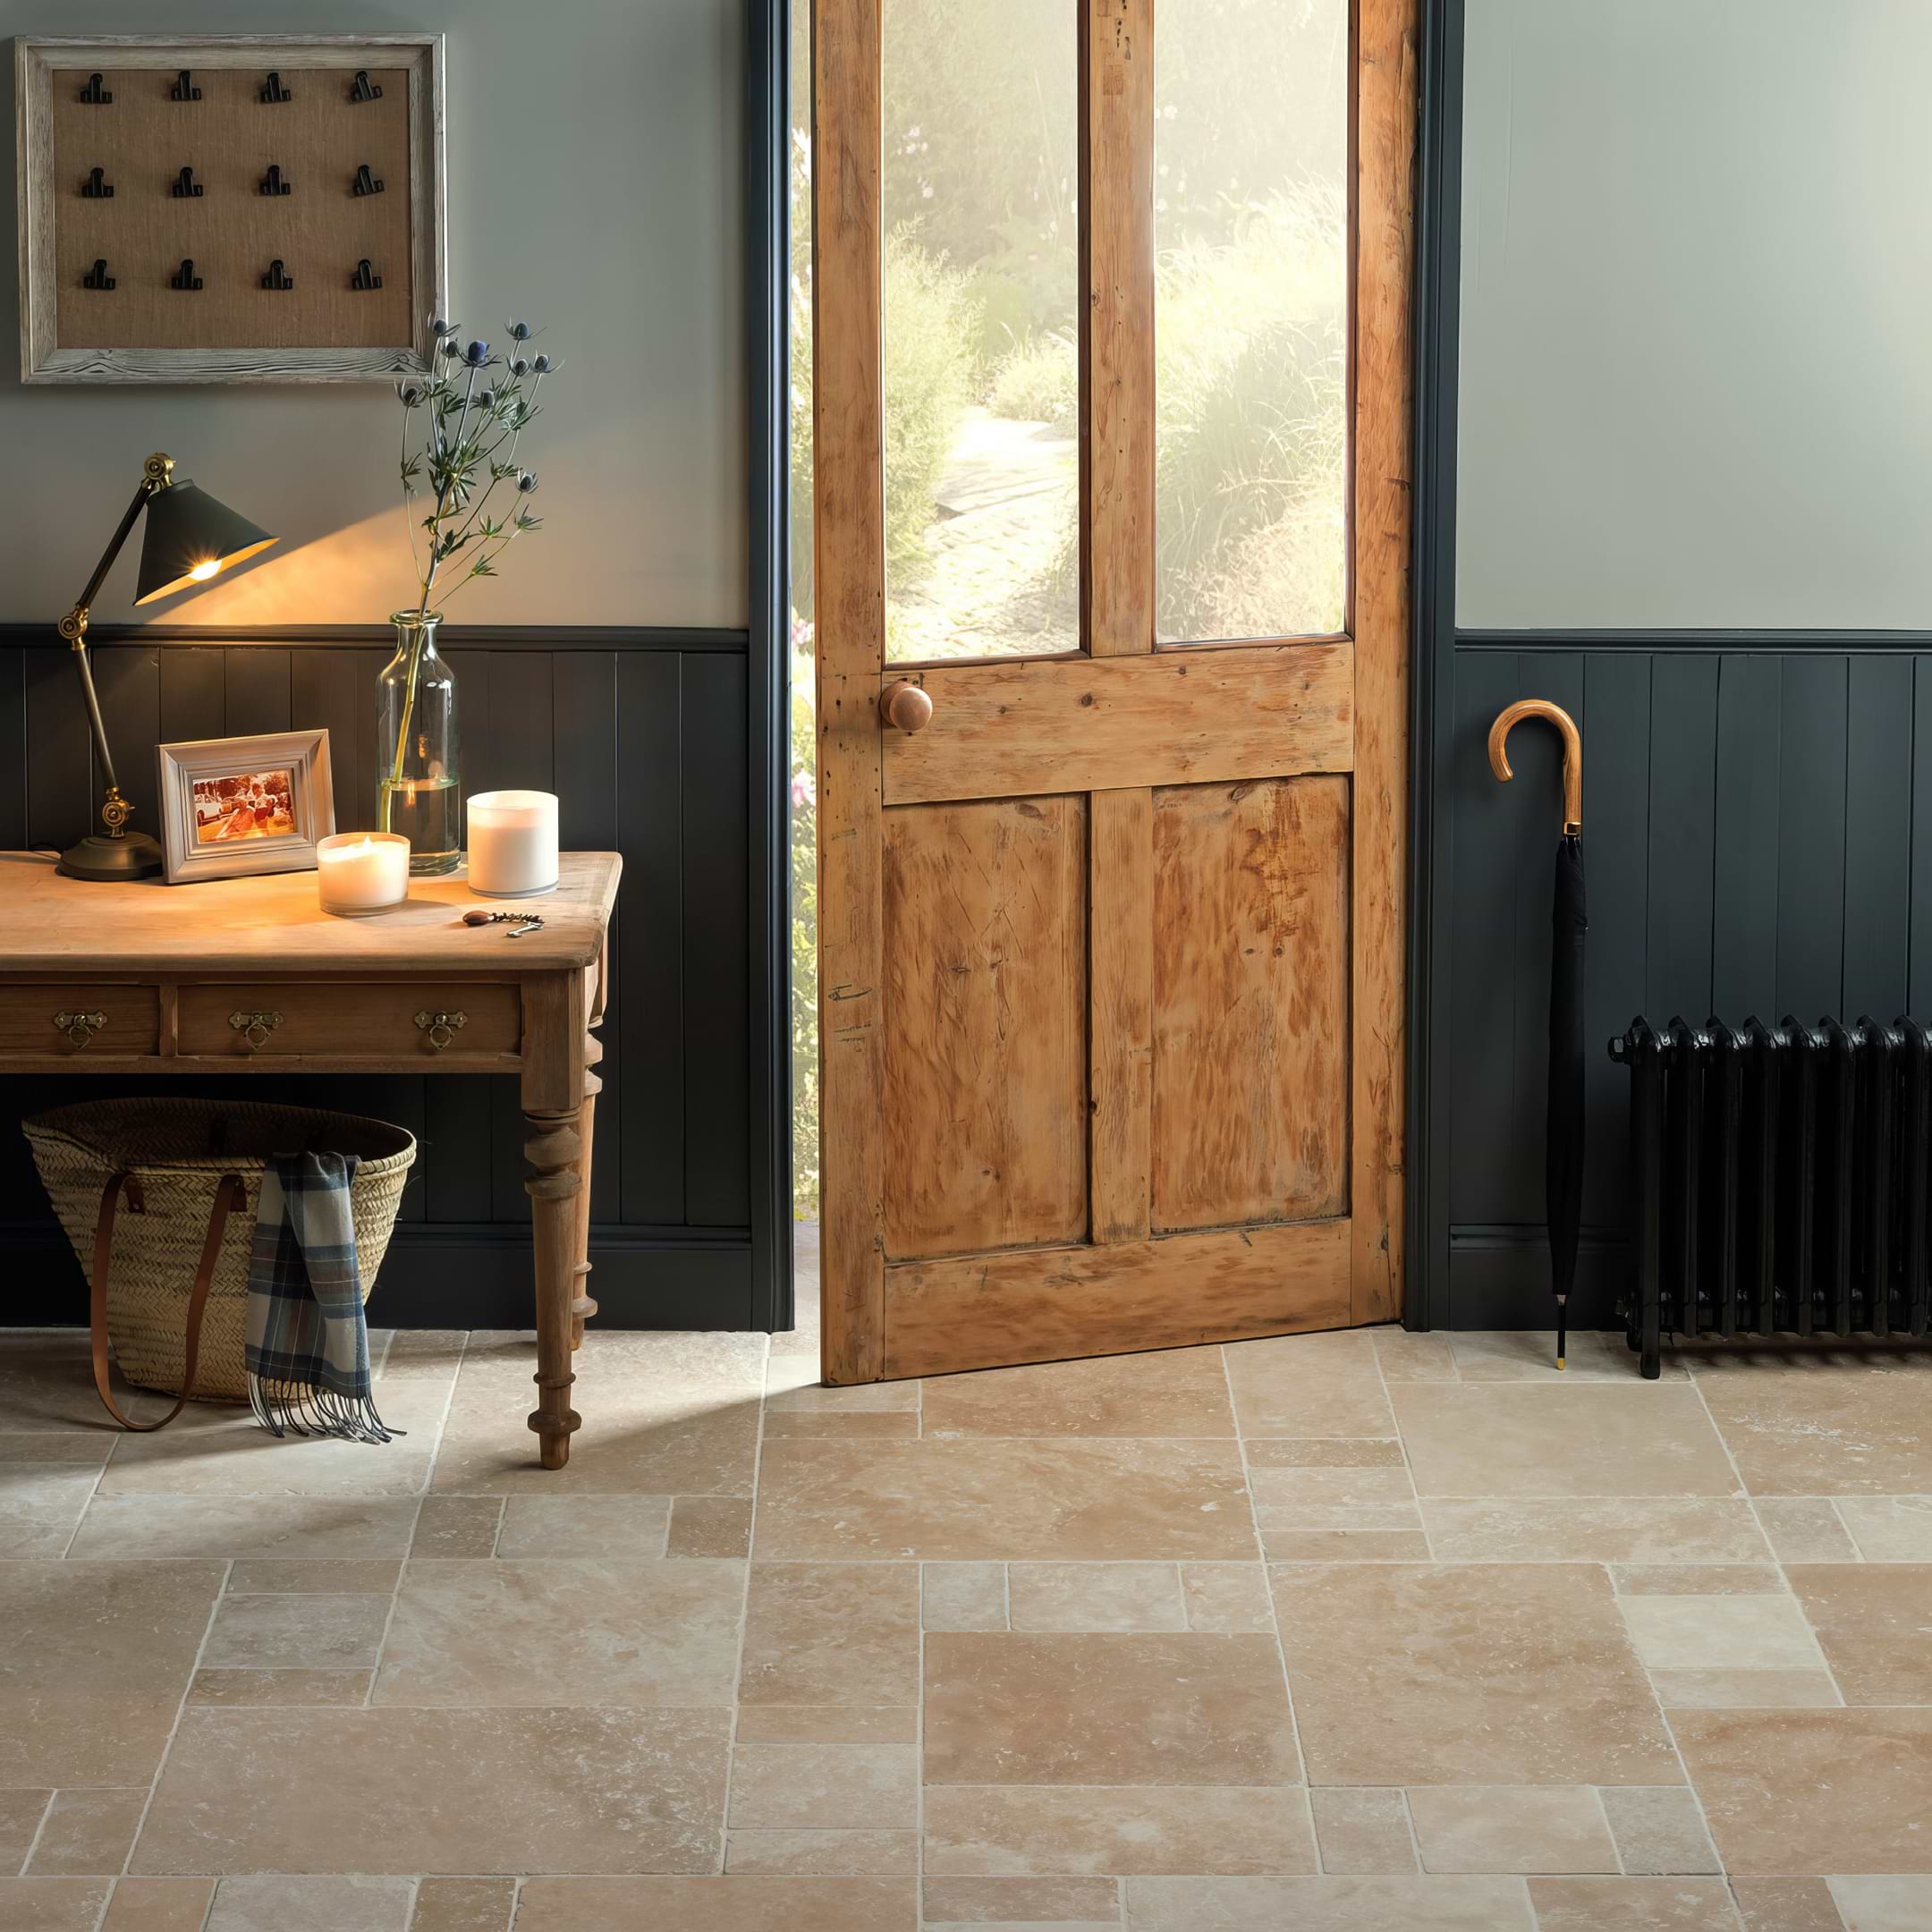 Levantine Ivory Unfilled & Tumbled Travertine 610 x 406mm - Hyperion Tiles